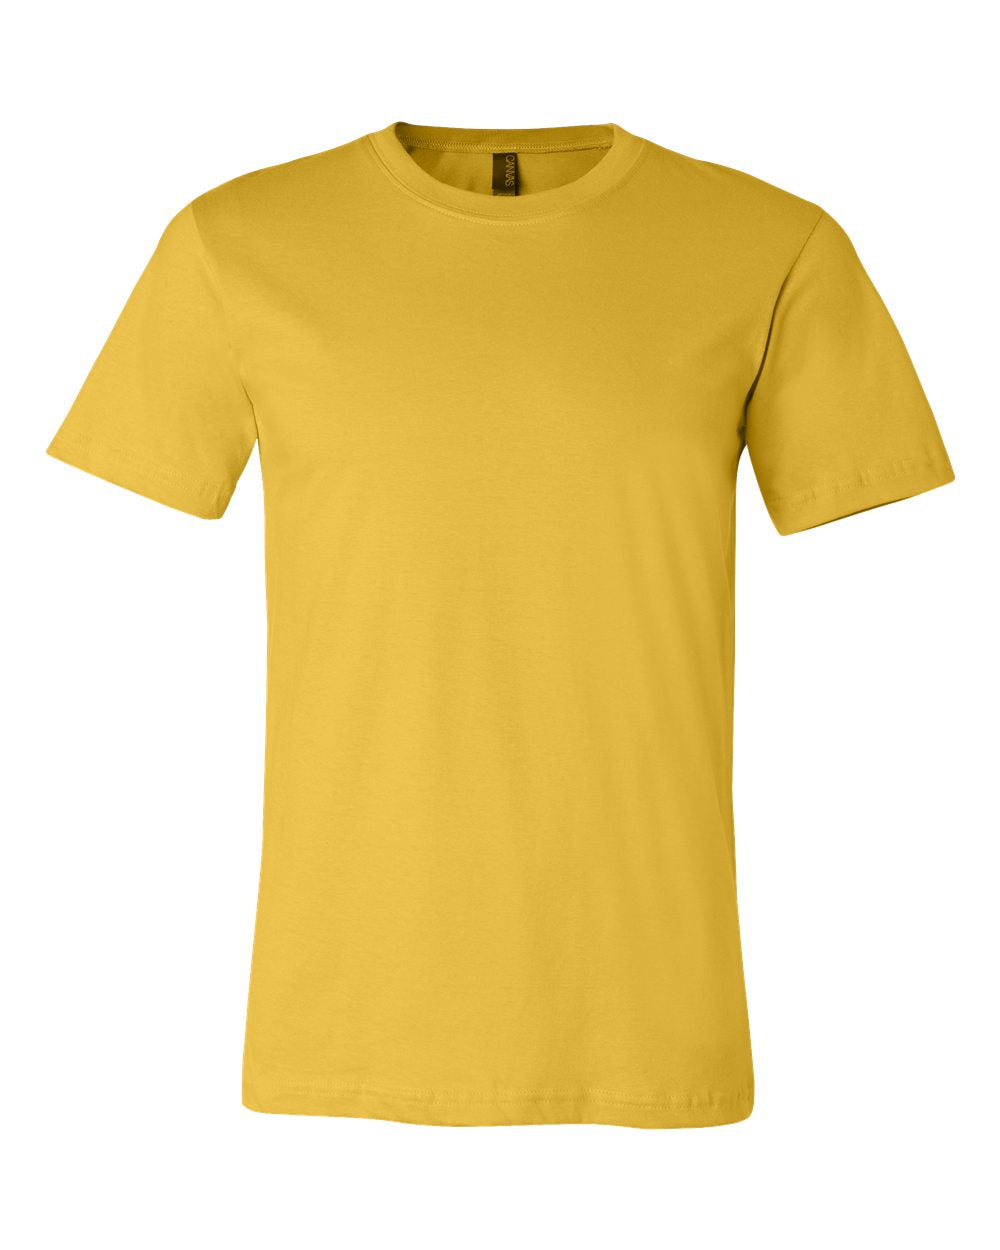 Bella + Canvas Cotton Tee (3001) in Maize Yellow